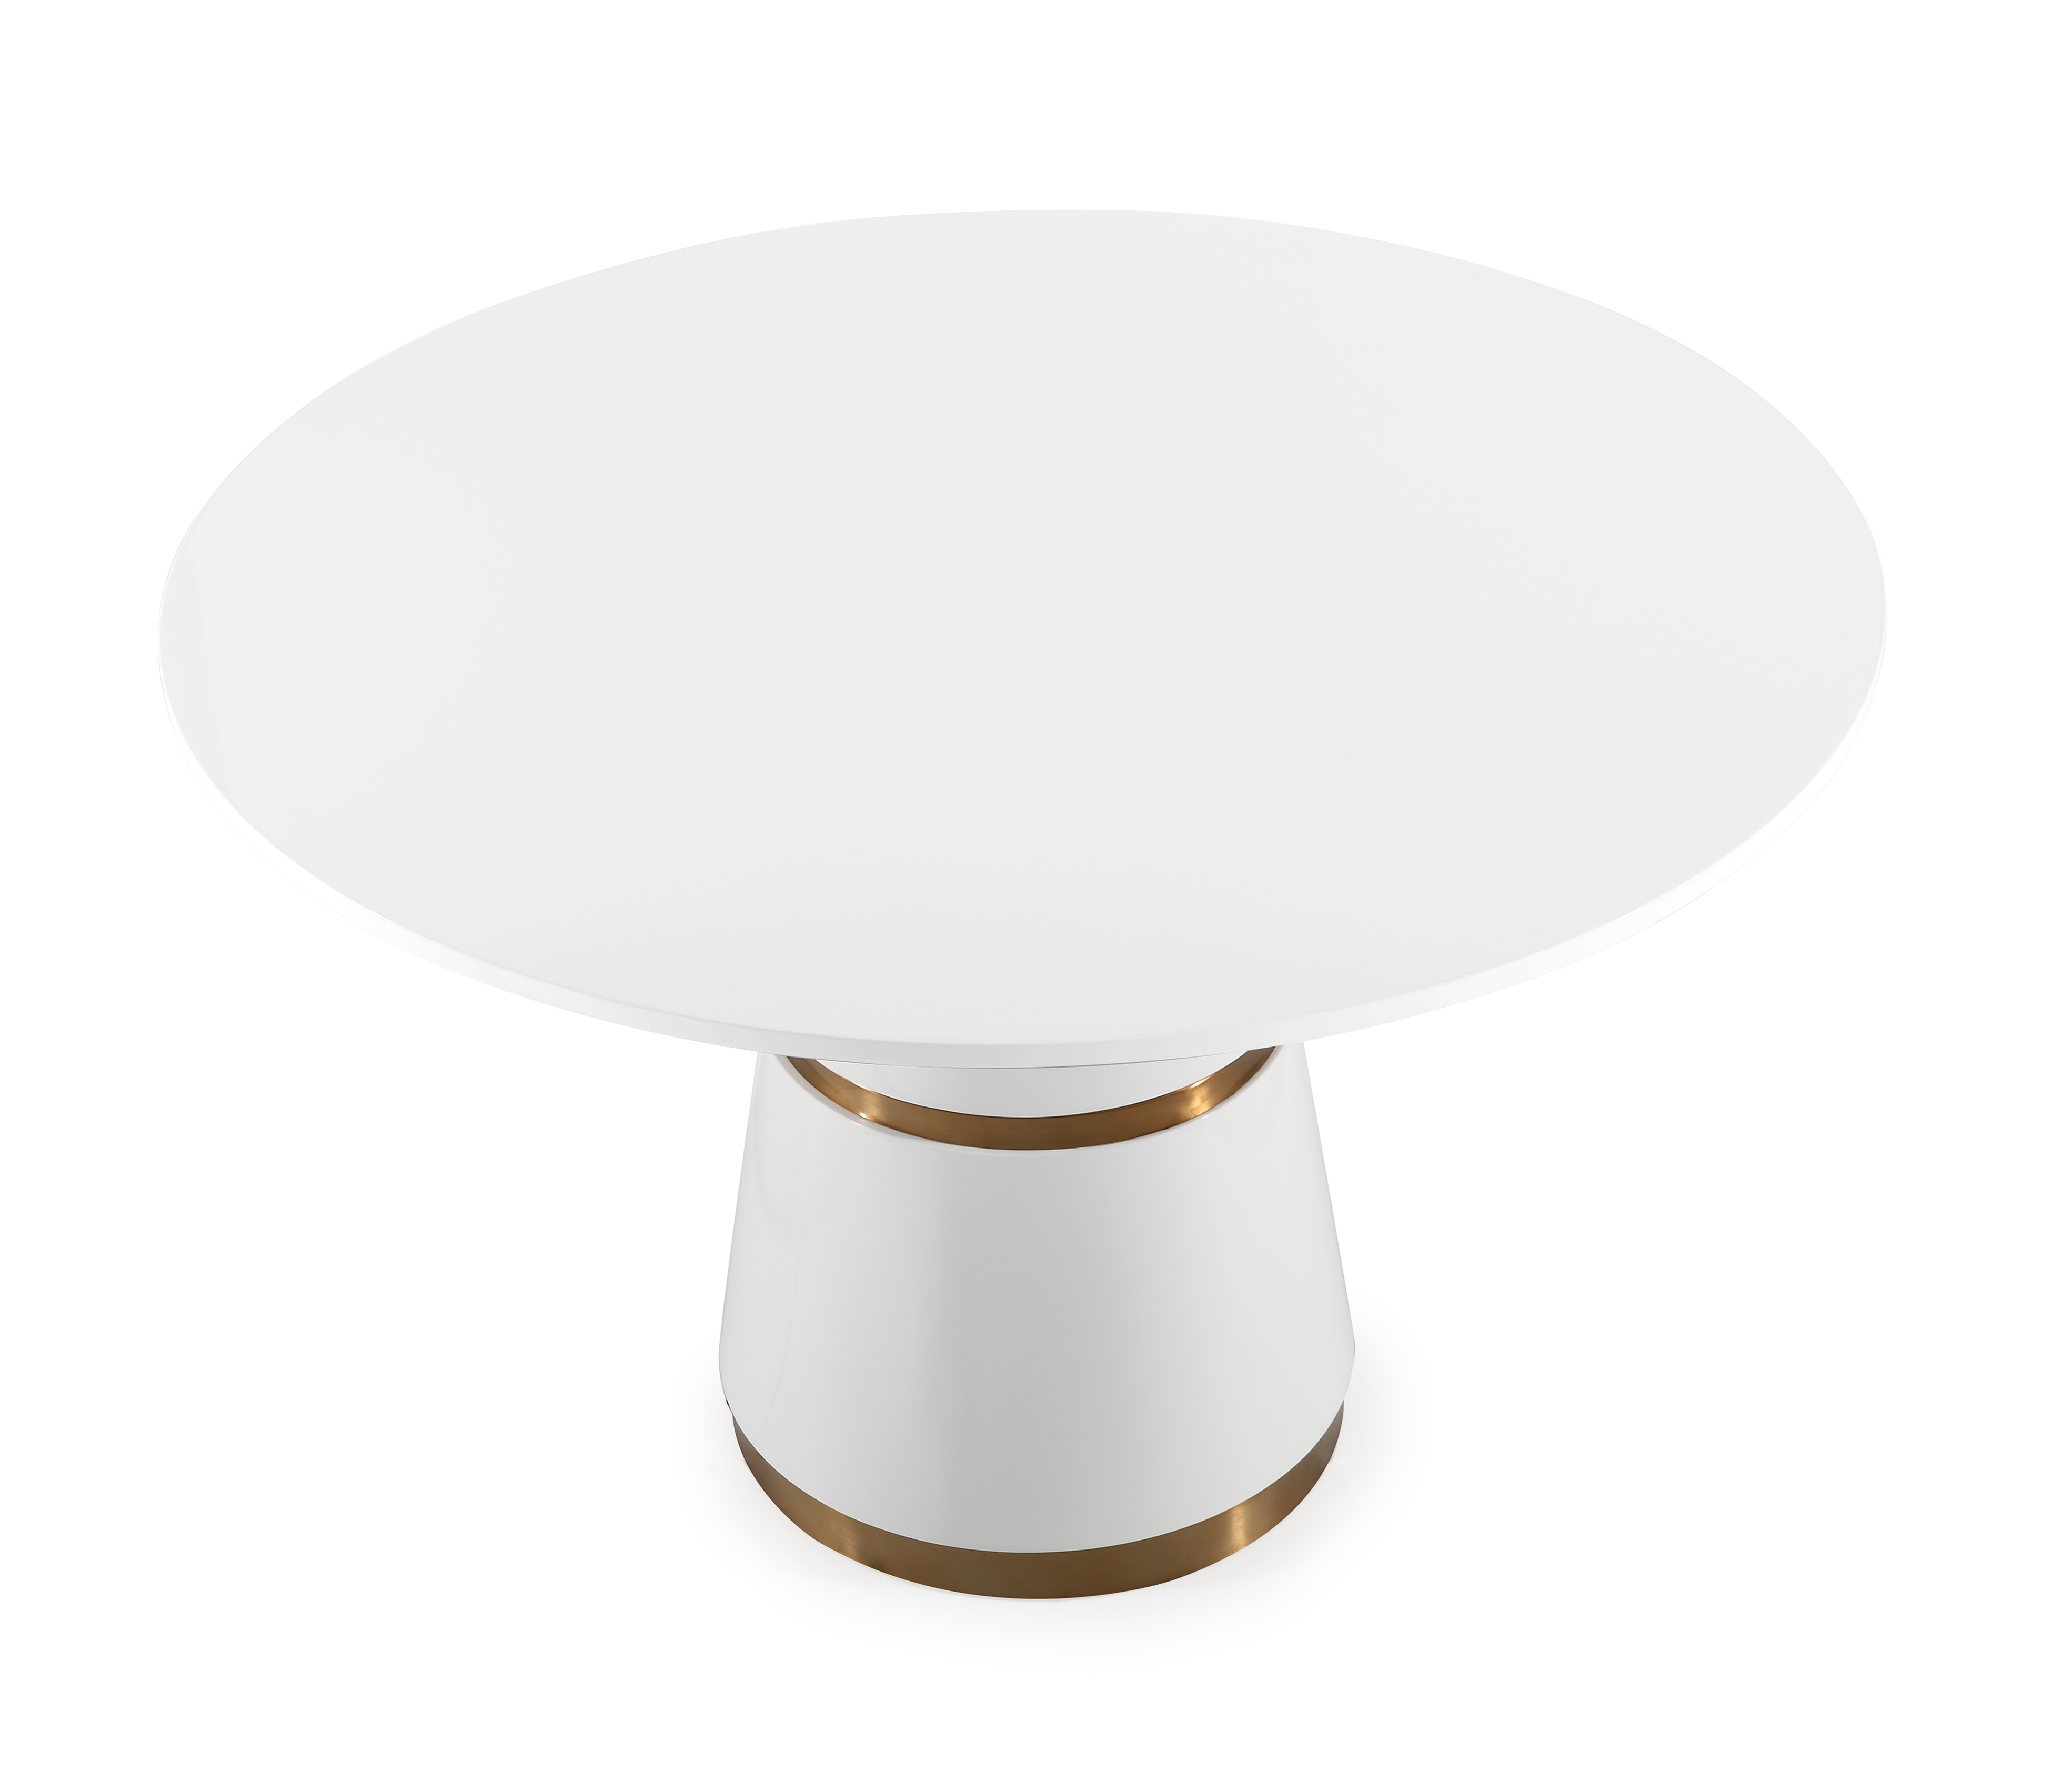 Evie Dining Table - Image 1